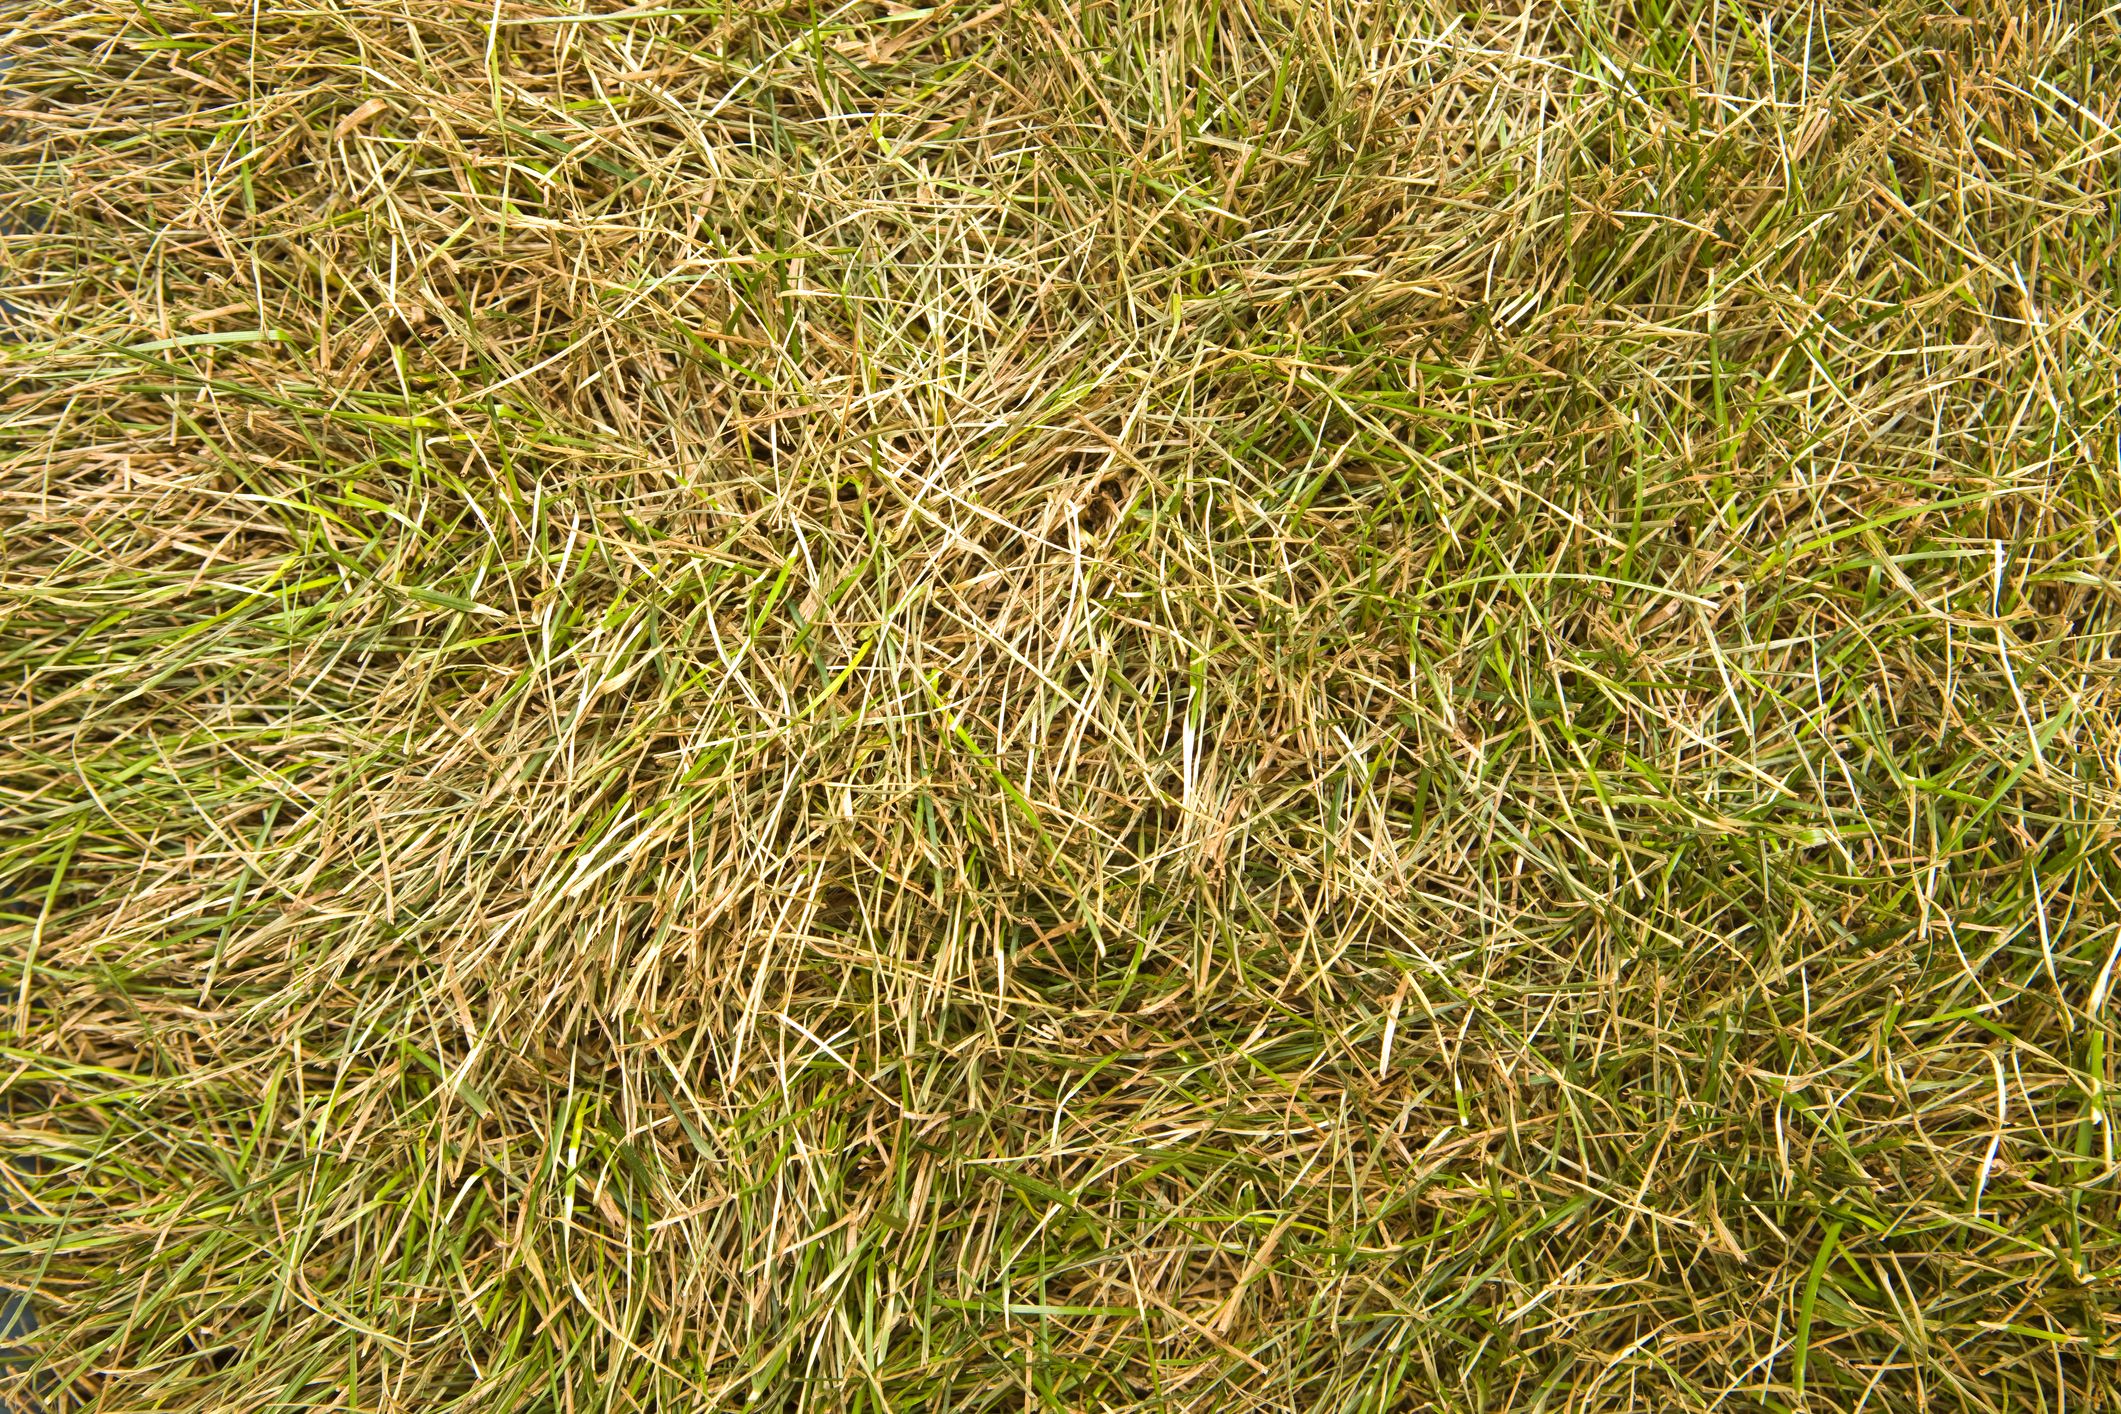 How to Treat Dry Grass and Brown Spots | Lawn Care Guide 2022